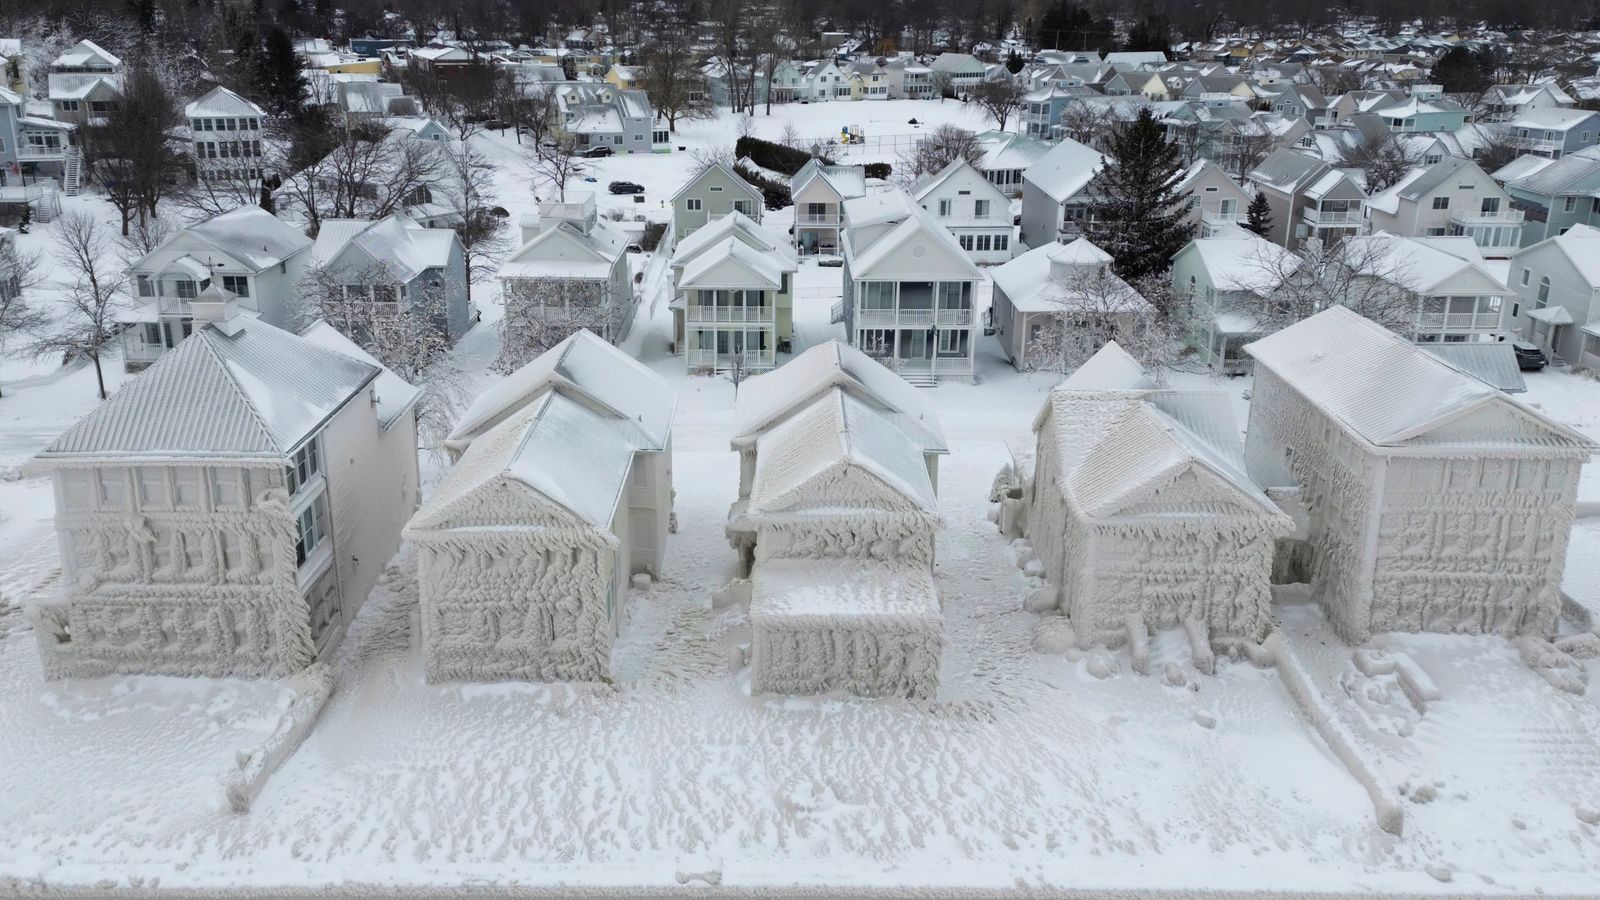 US snow storm covers houses in ice as people struggle to dig out after deadly blizzards